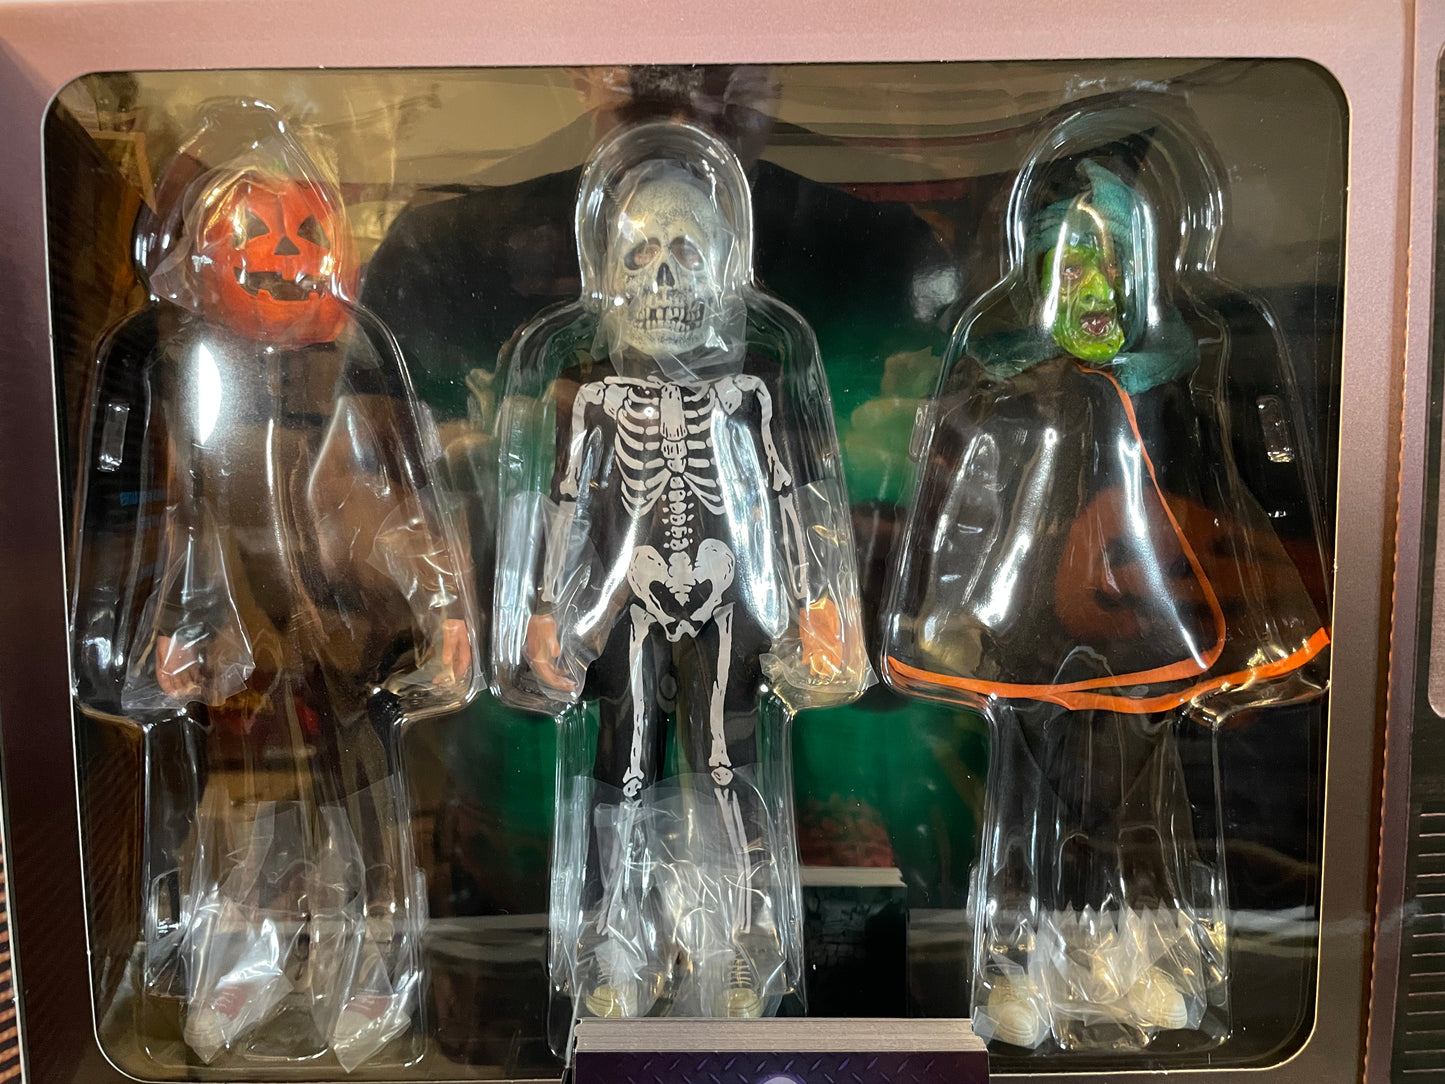 HALLOWEEN III: SEASON OF THE WITCH - 1:6 SCALE TRICK OR TREATER ACTION FIGURE SET